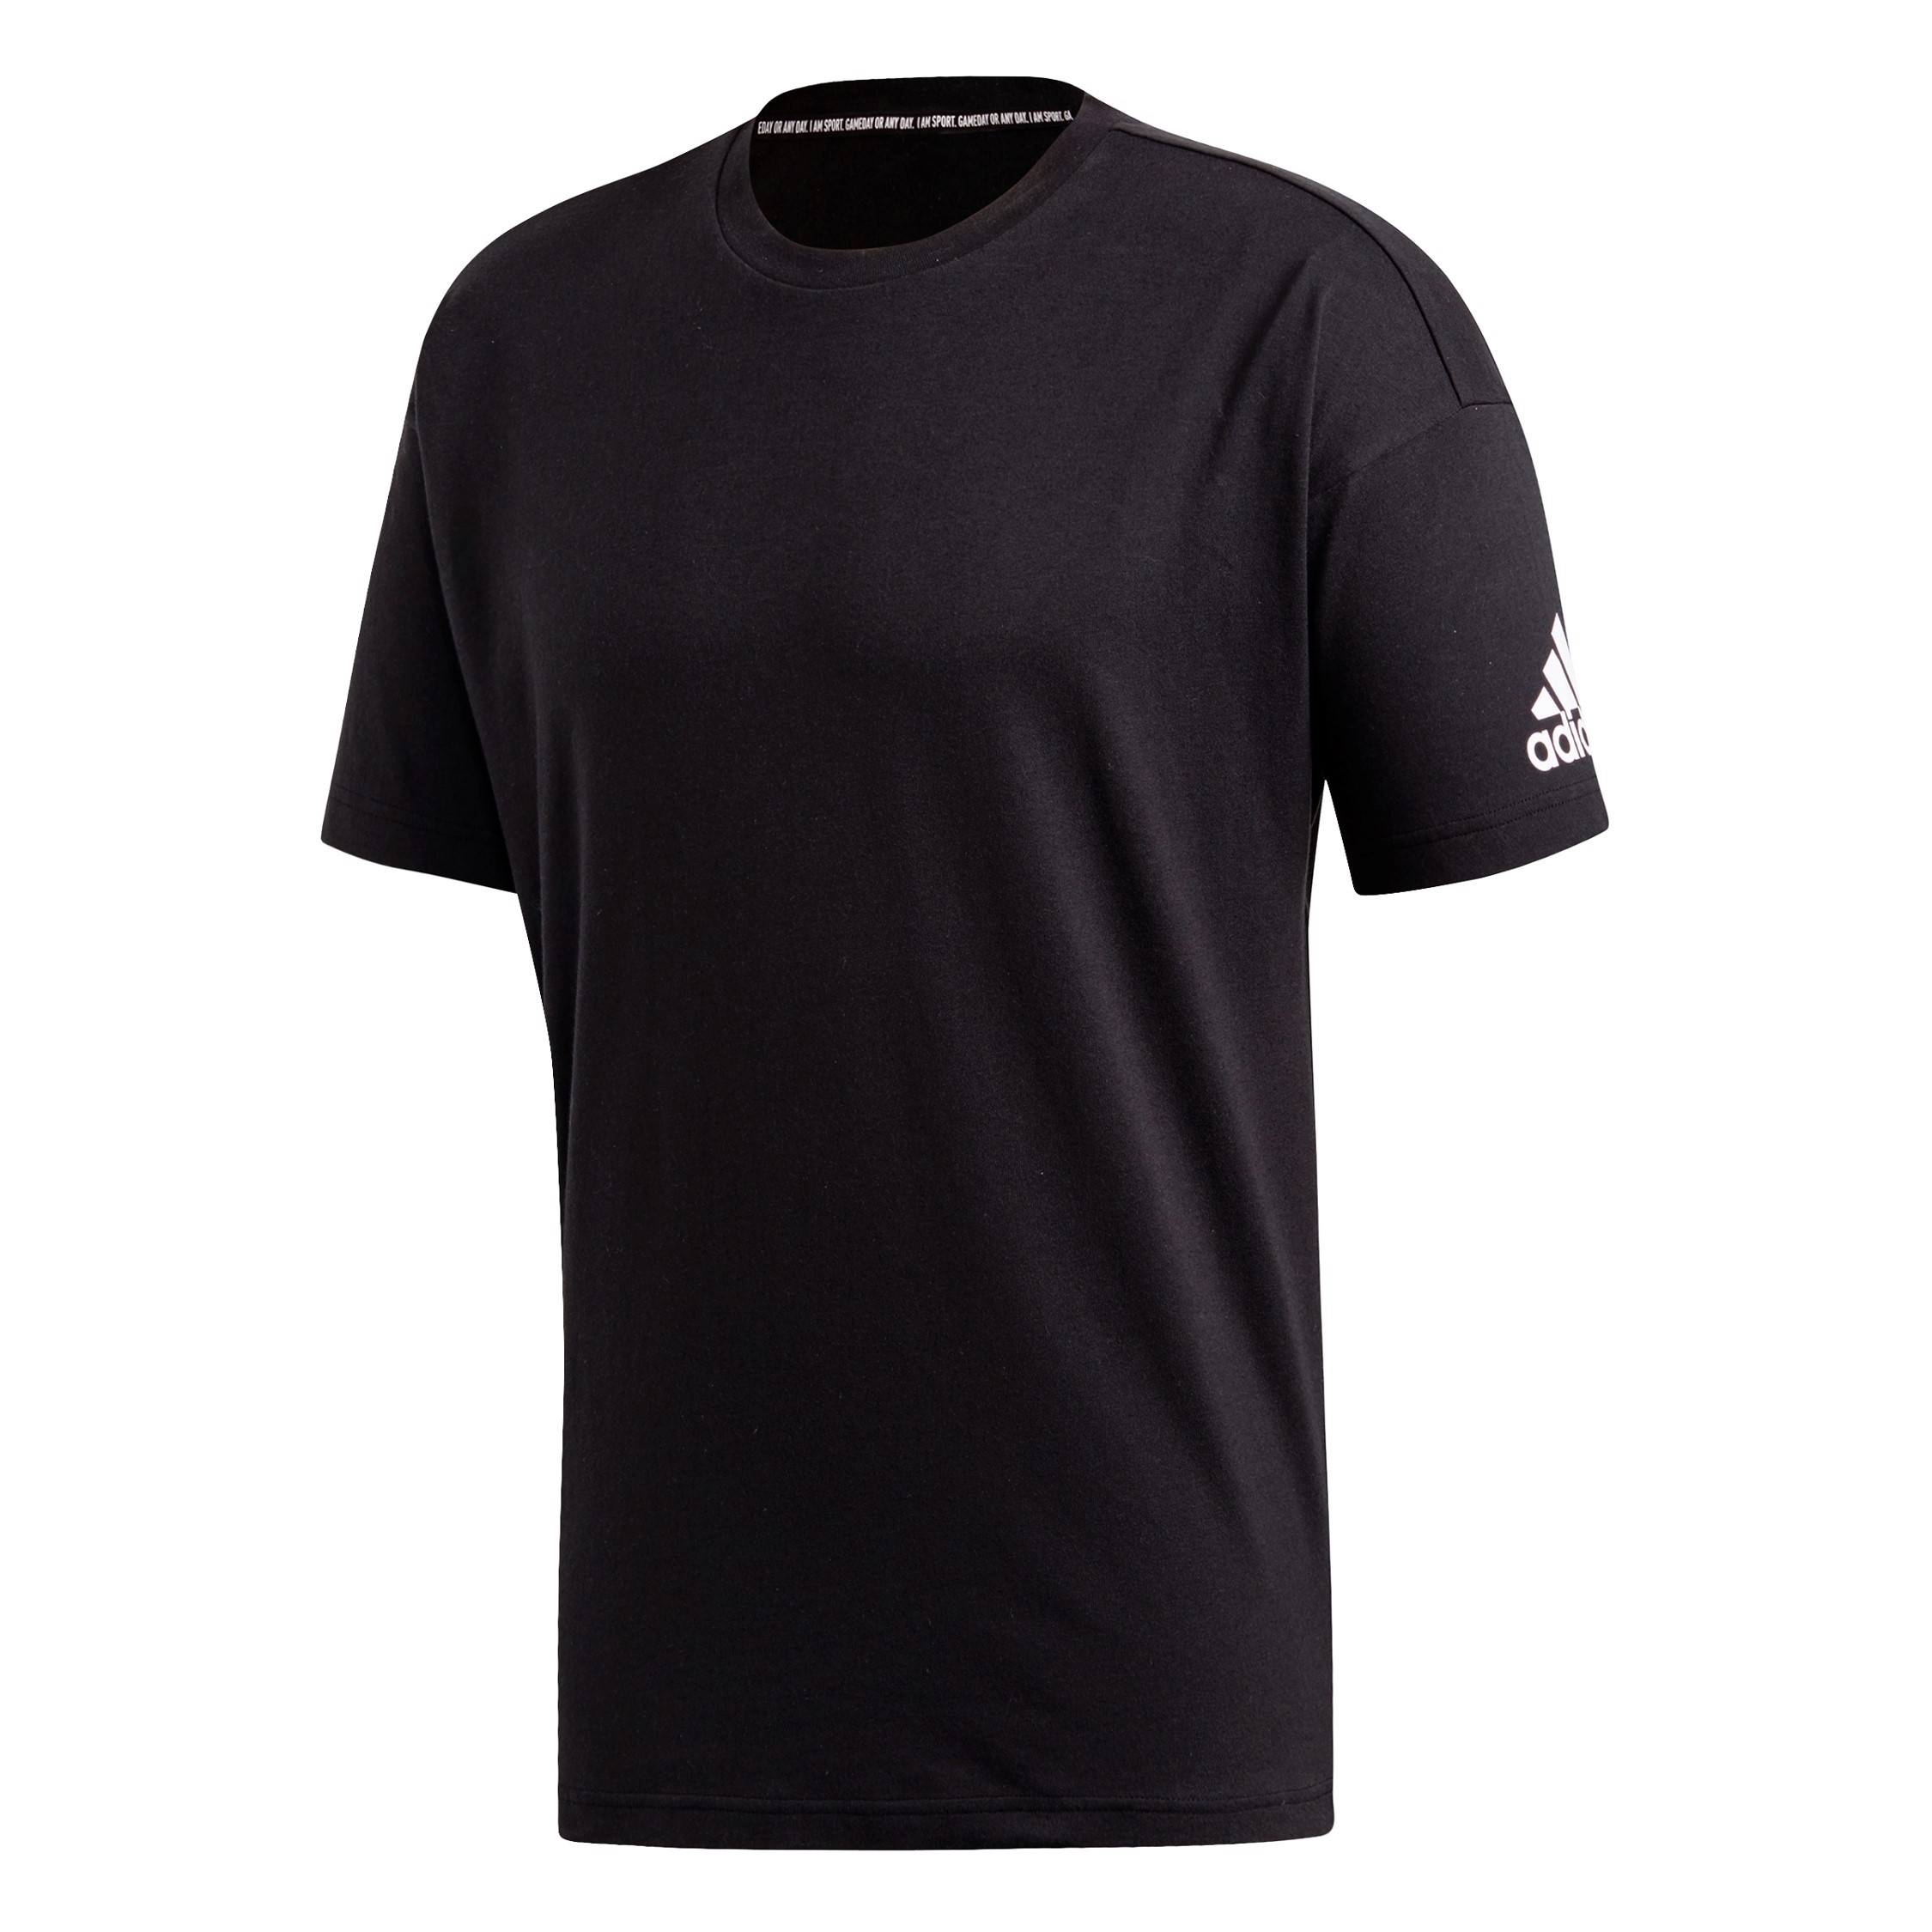 Adidas Men's Must Have T shirt